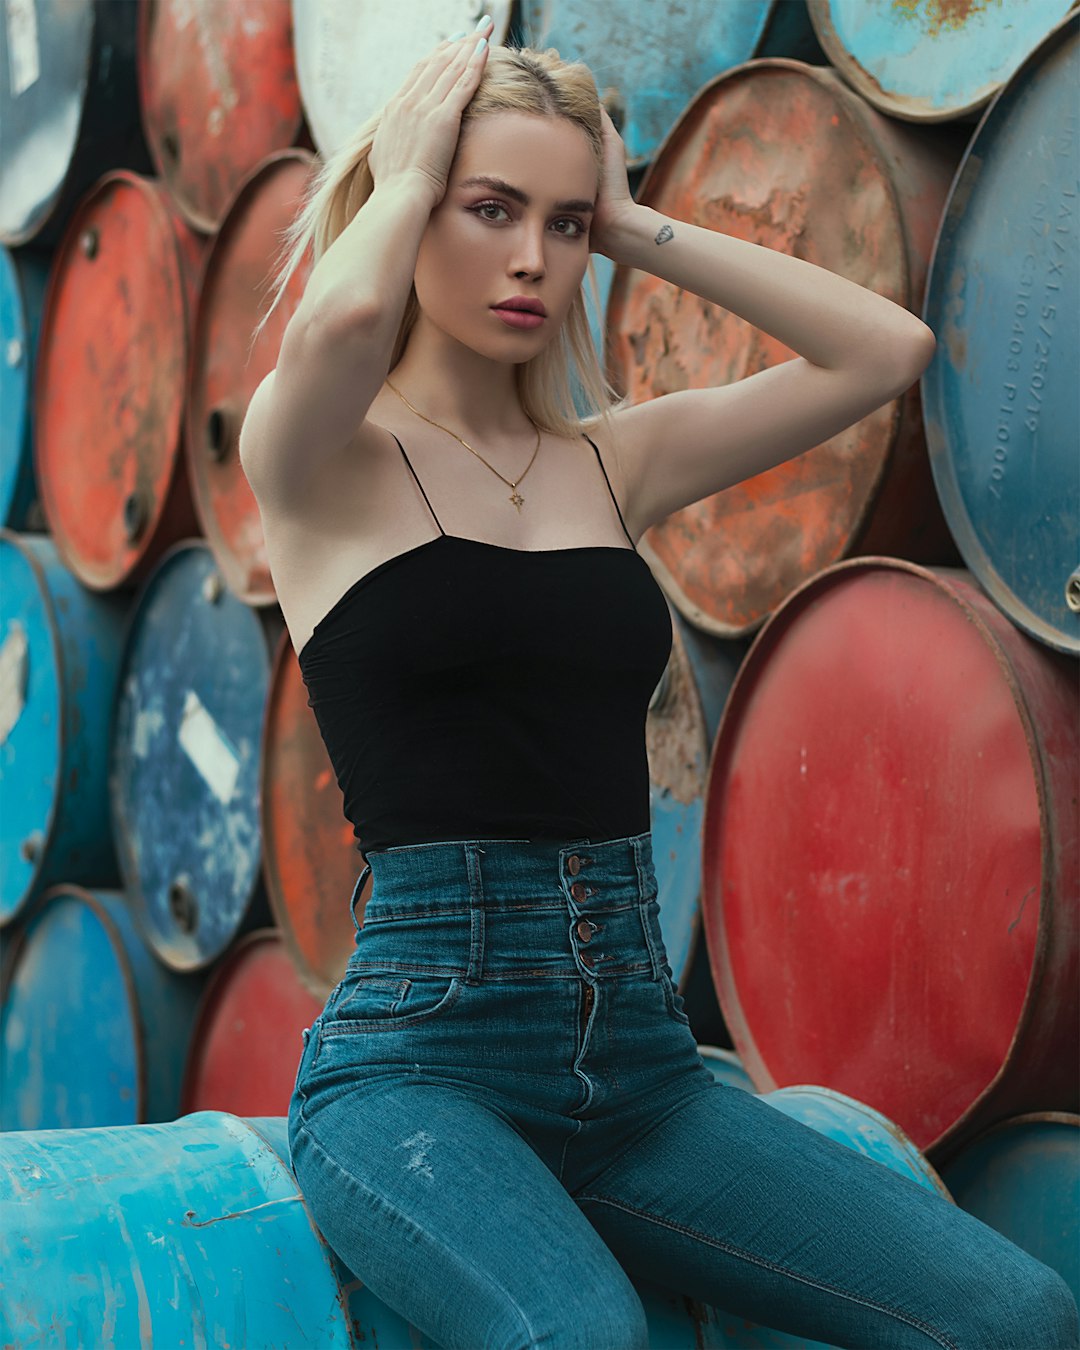 woman in black spaghetti strap top and blue denim jeans sitting on round drum